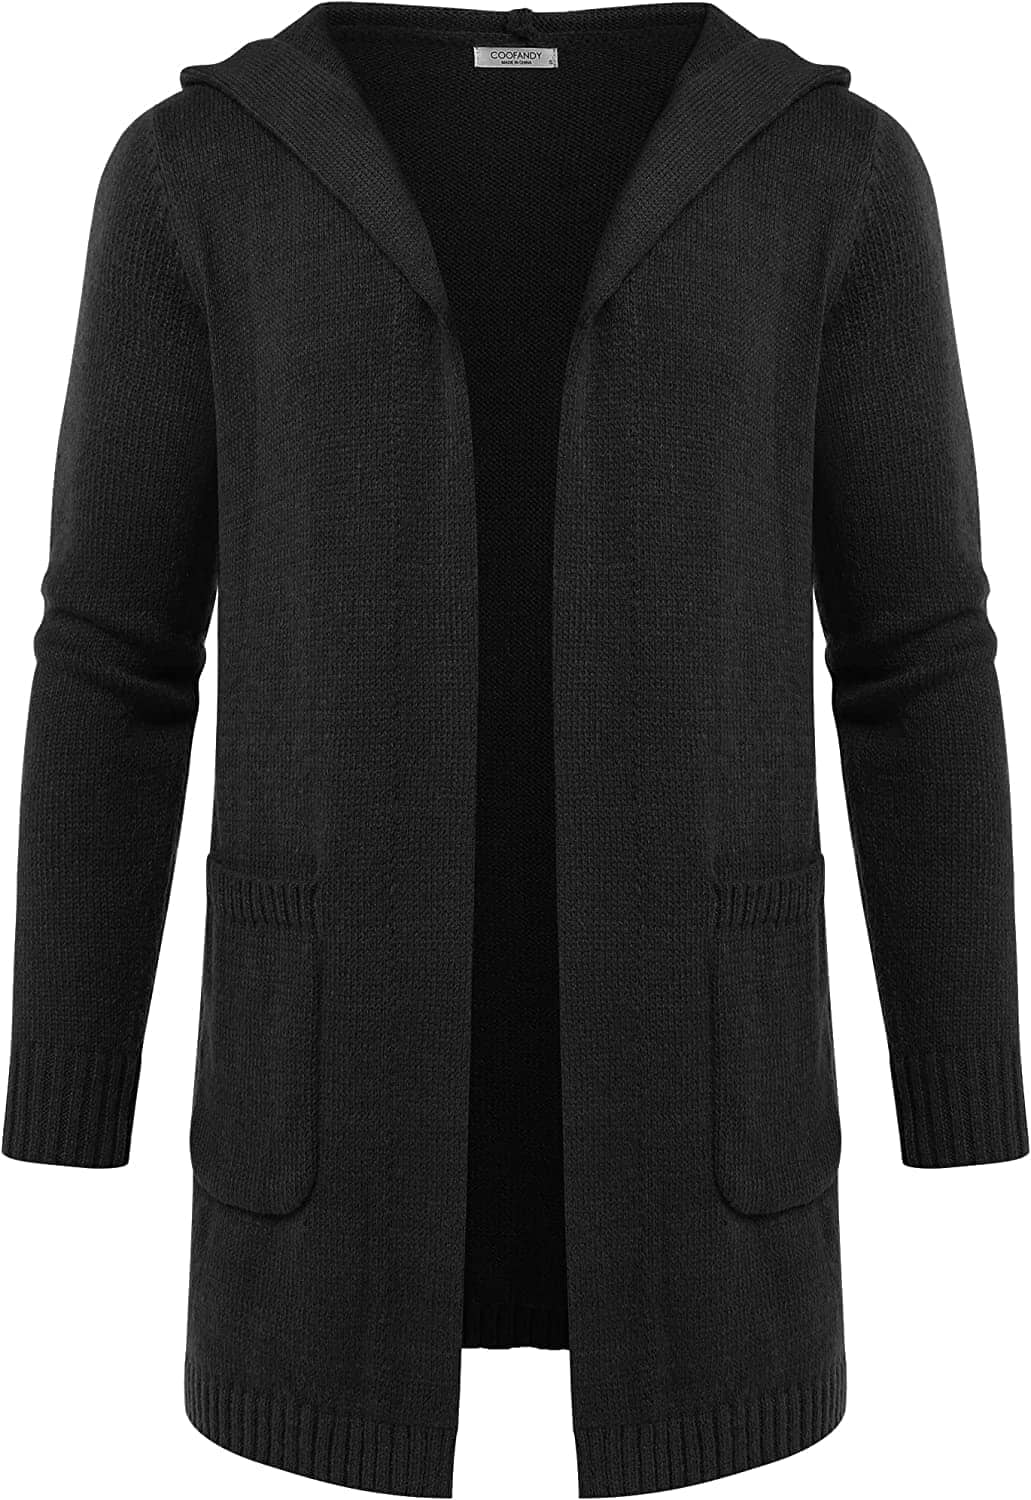 Lightweight Knitted Cardigan Sweaters with Pockets (US Only) Coat COOFANDY Store Black S 